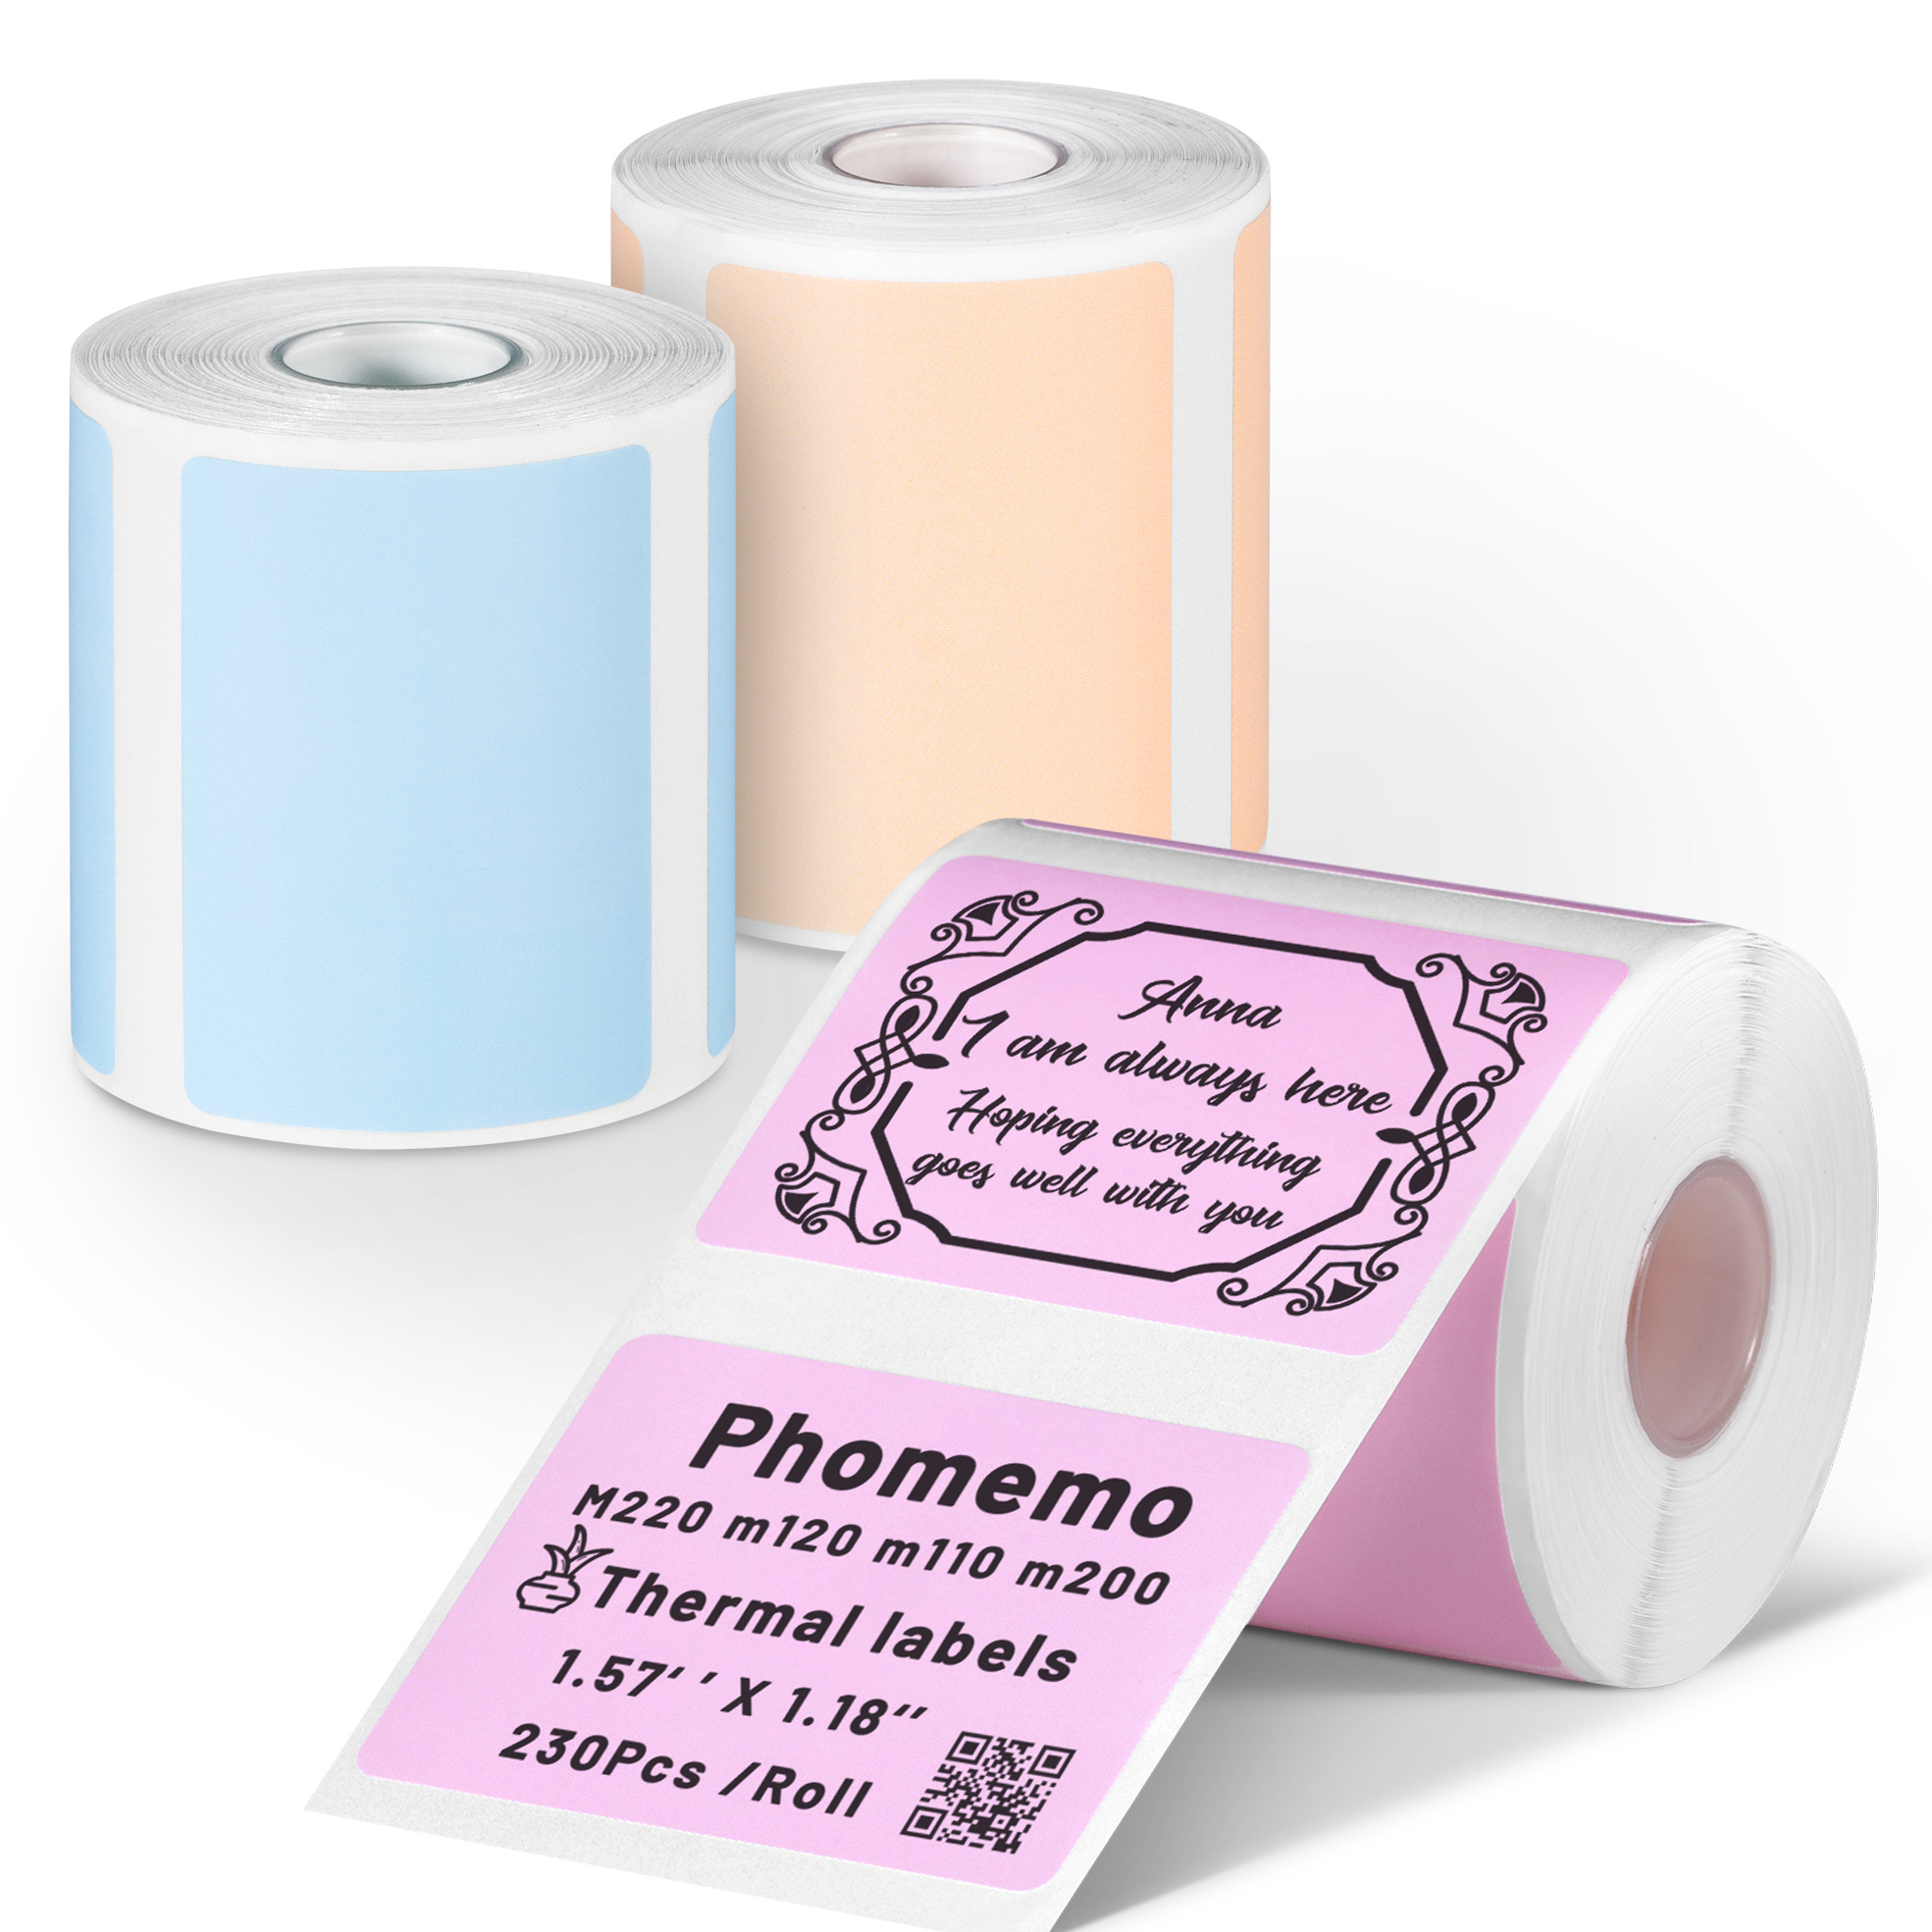 Phomemo Sticker Paper Thermal Large Size Label for Phomemo M200